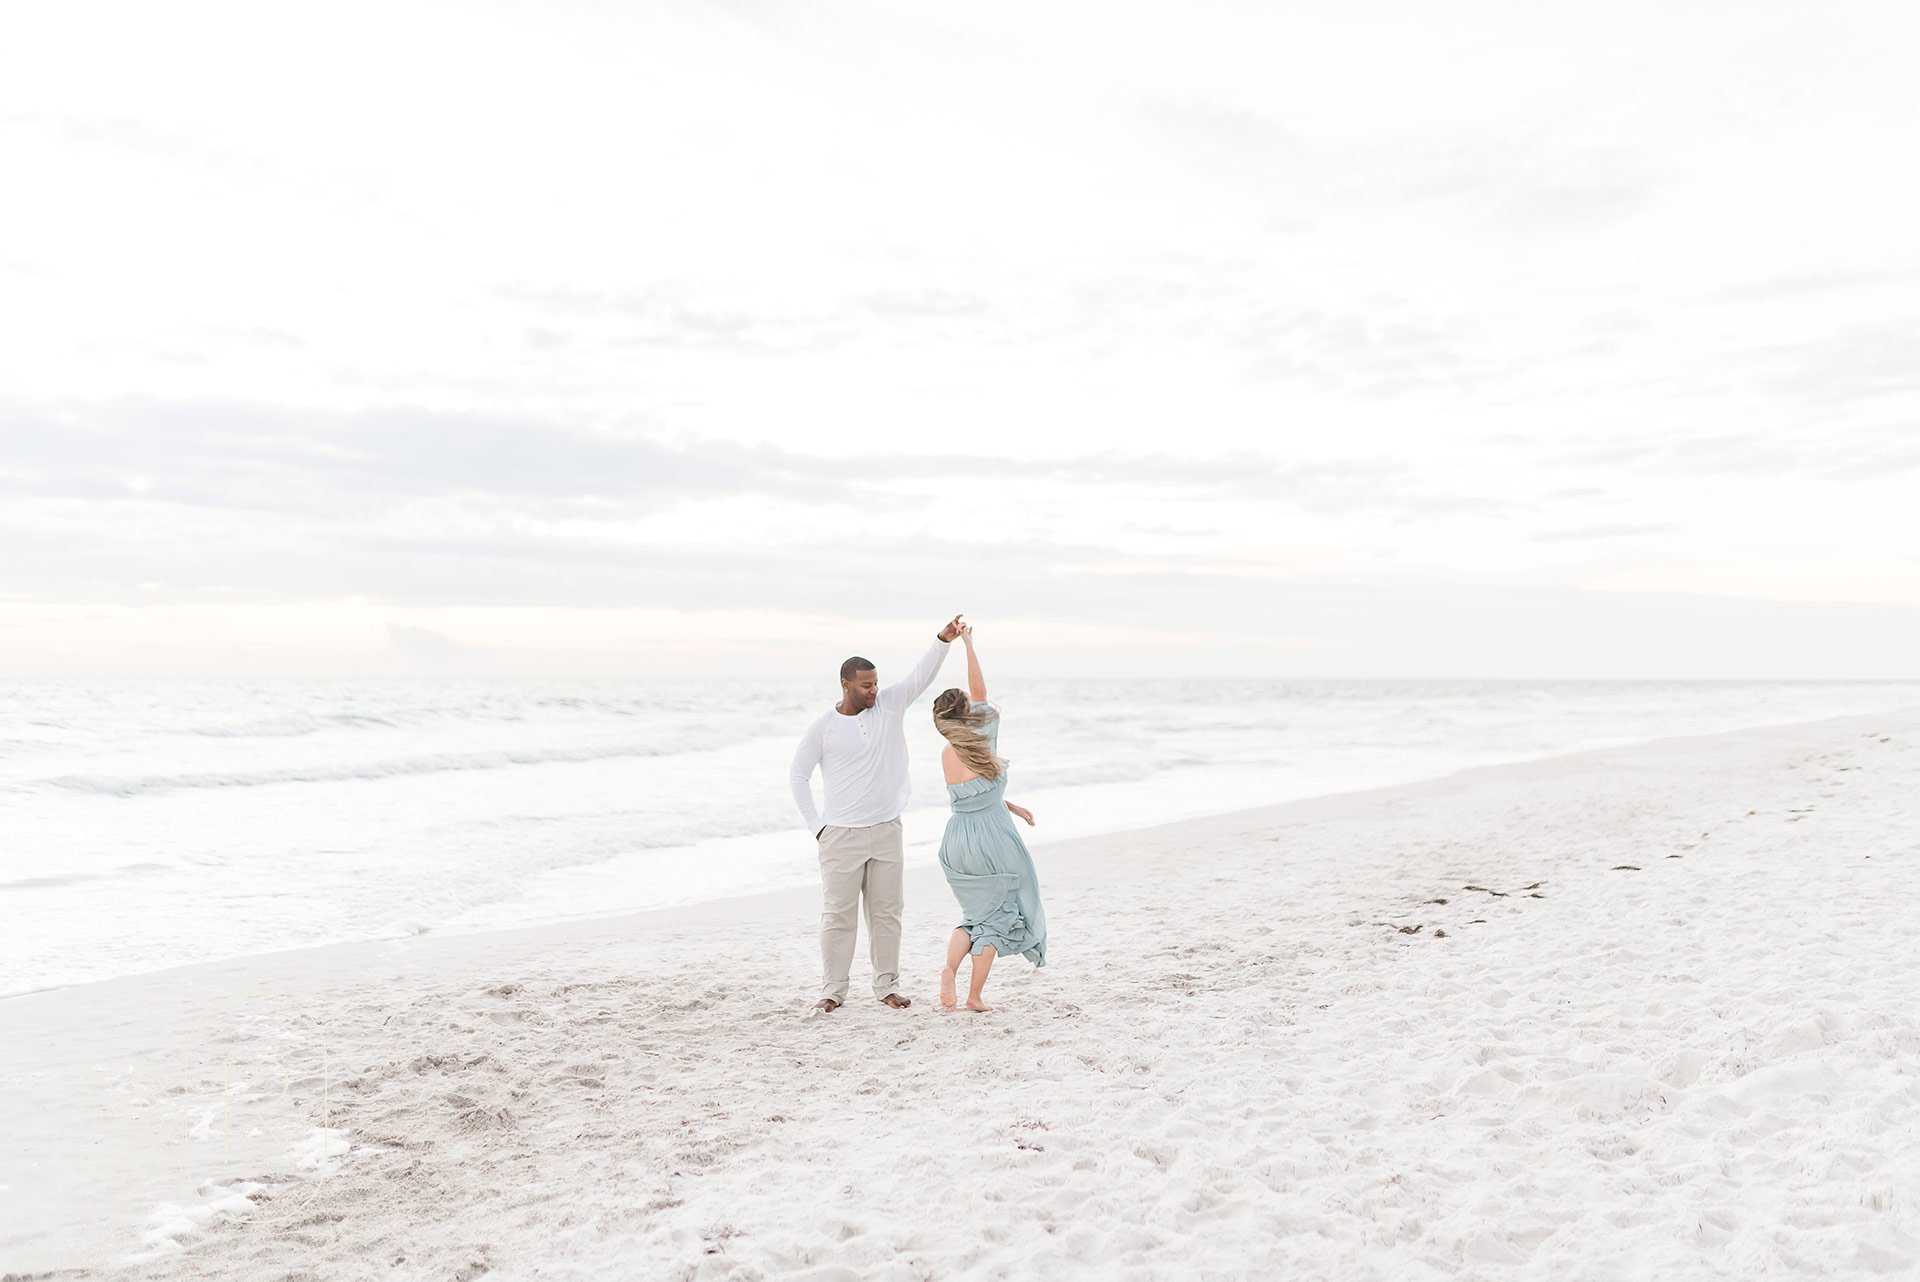 mom-dad-dancing-florida-beach-sunset-florida-photography-workshop-family-session-behind-the-scenes-photography-Reflections-niagara-ontario.jpeg